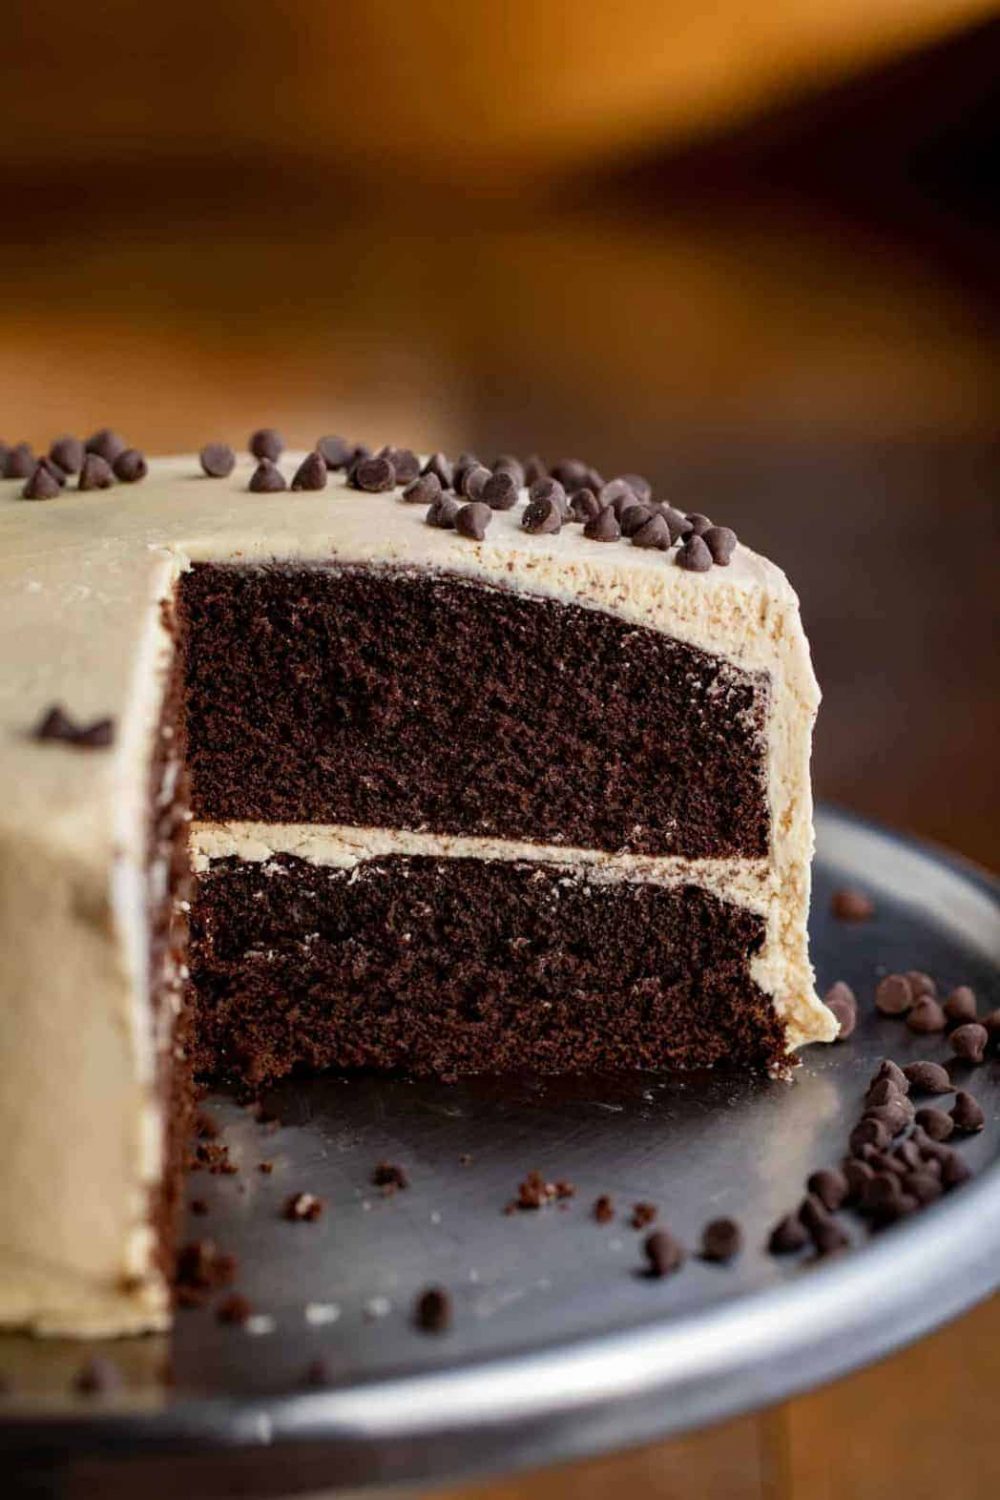 Heavenly Chocolate Peanut Butter Cake Unveiled